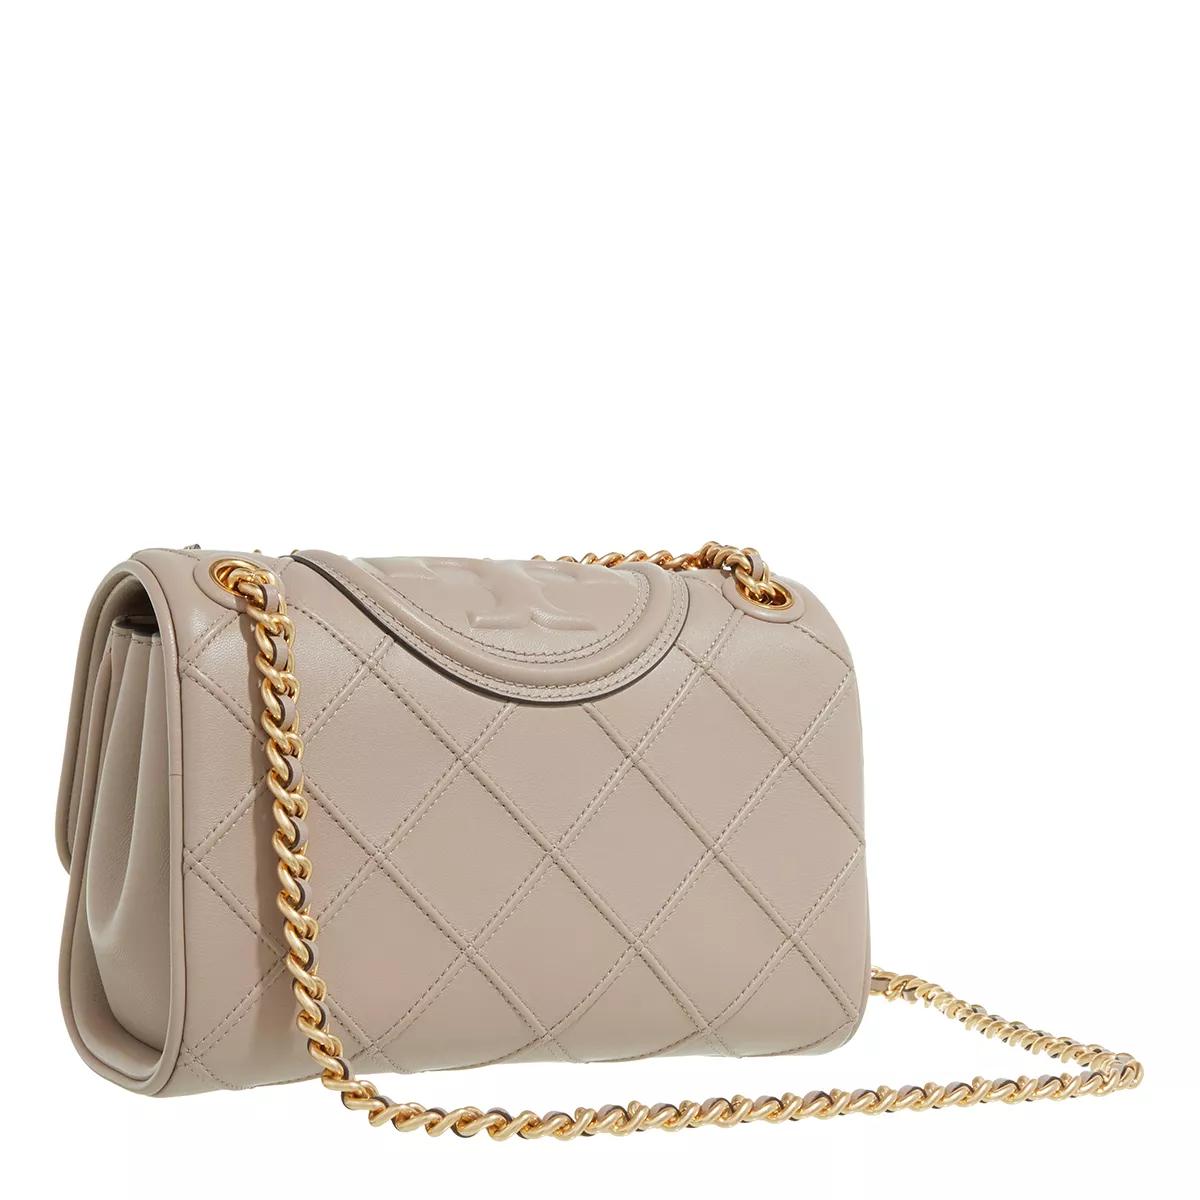 TORY BURCH Crossbody bags Fleming Soft Small Convertible Shoulder Bag in beige